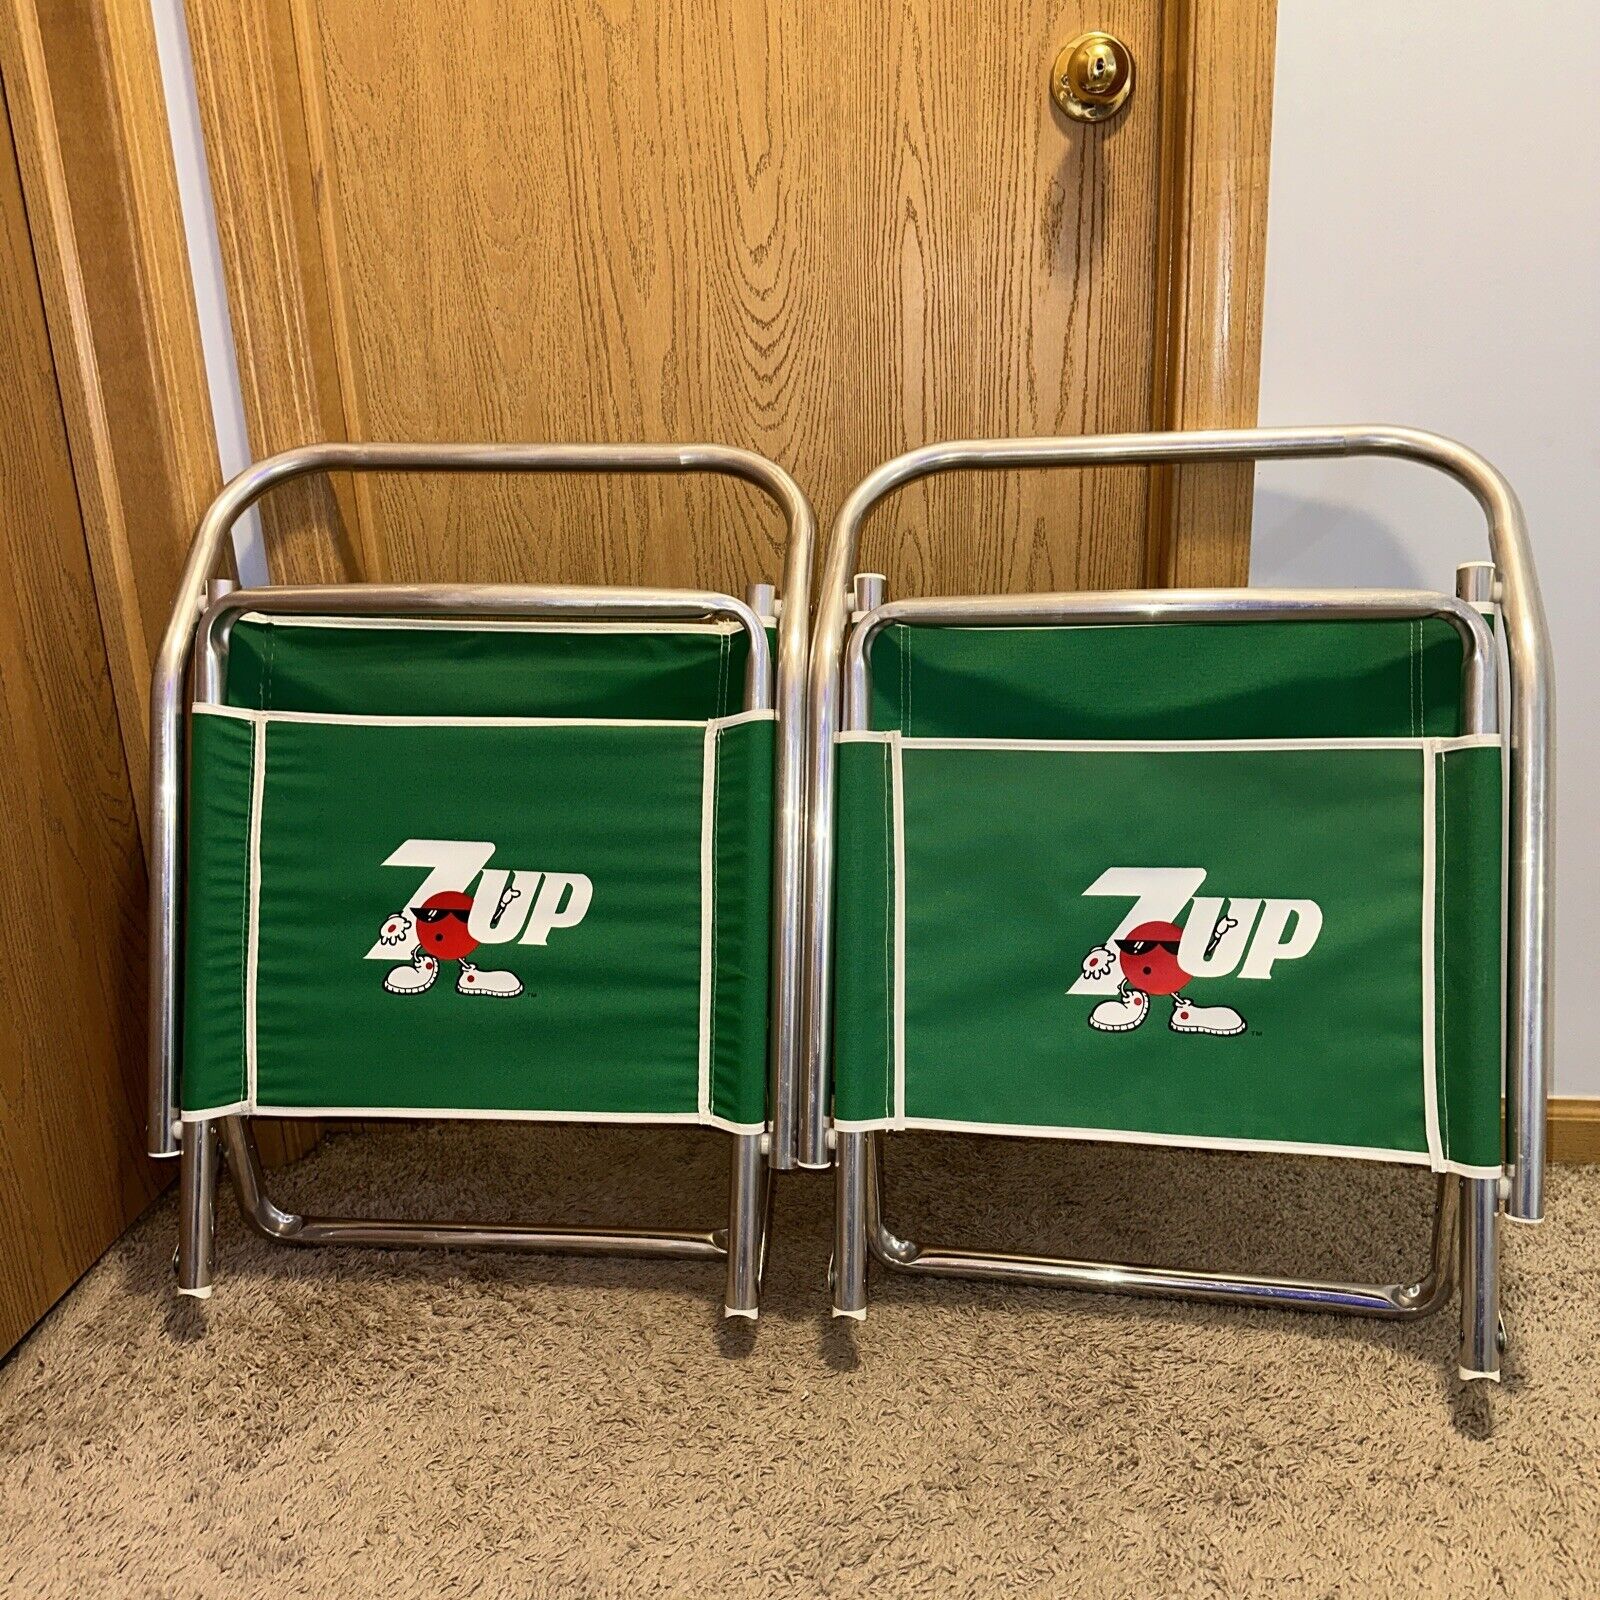 2 Vintage 7-Up folding beach/stadium chairs With aluminum frame(great Condition)